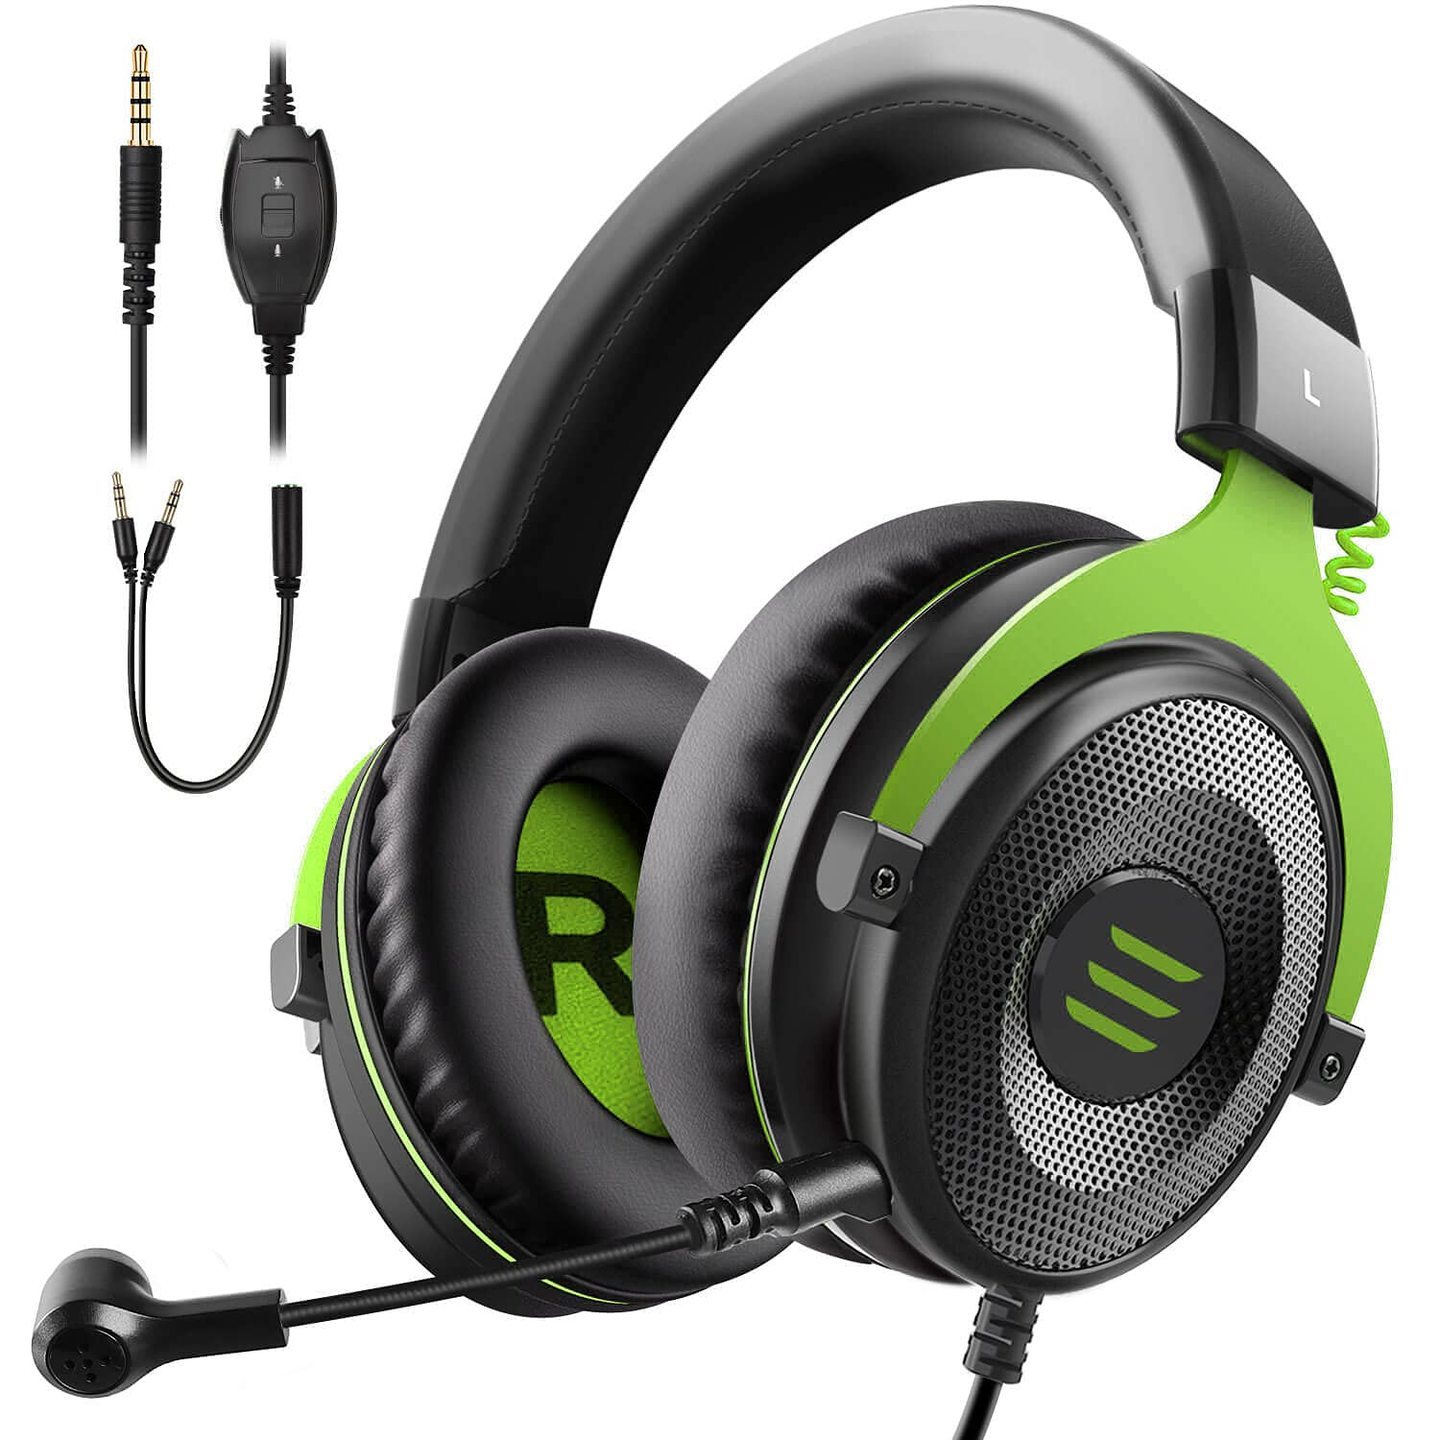 EKSA E900 Wired Stereo Gaming Headset with Noise Canceling Mic (Green)